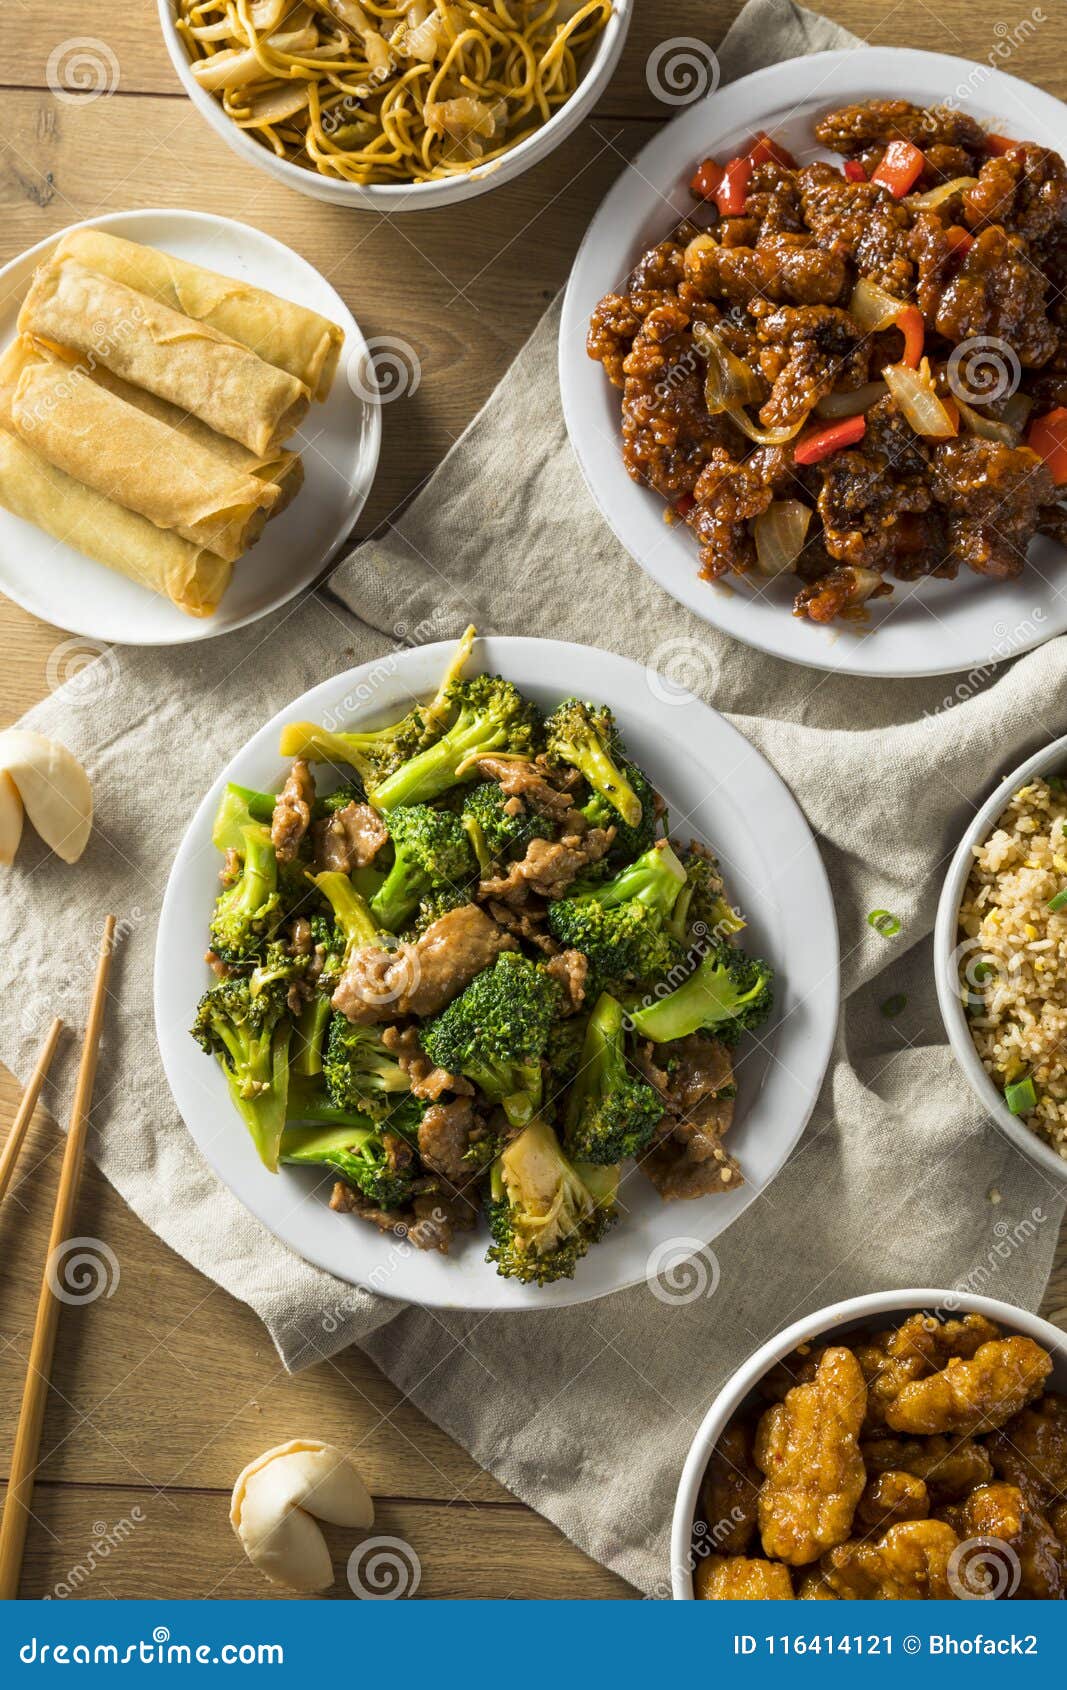 Spicy Chinese Take Out Food Stock Image - Image of ...